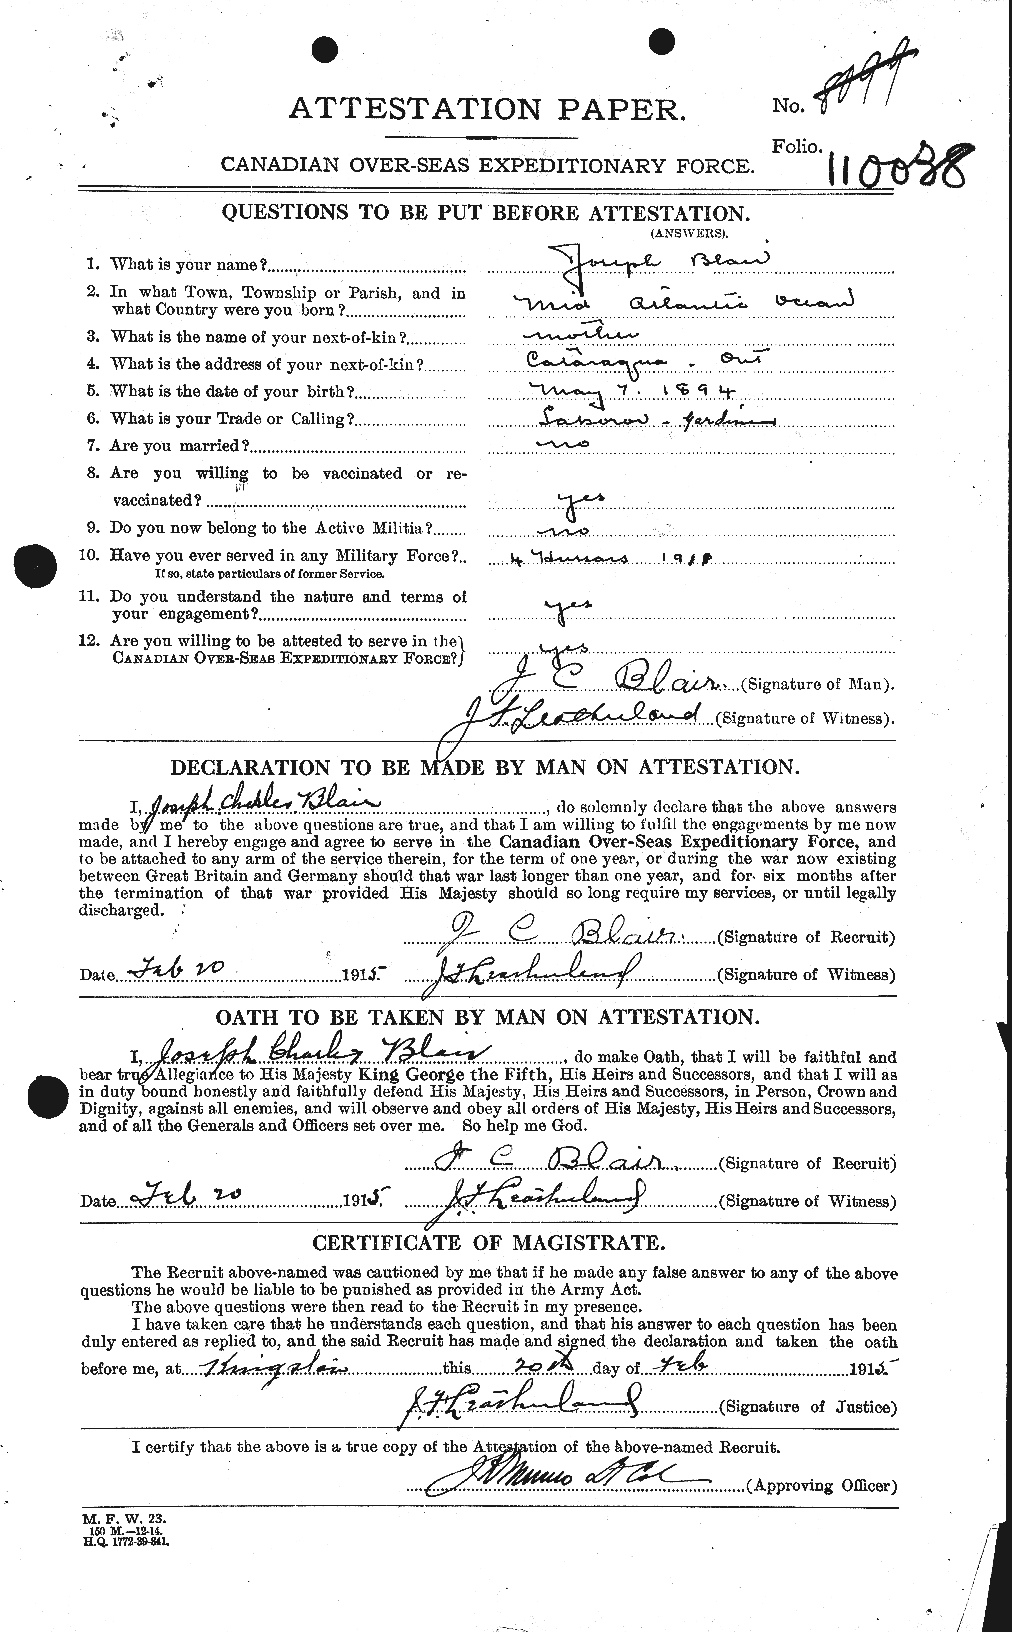 Personnel Records of the First World War - CEF 243104a